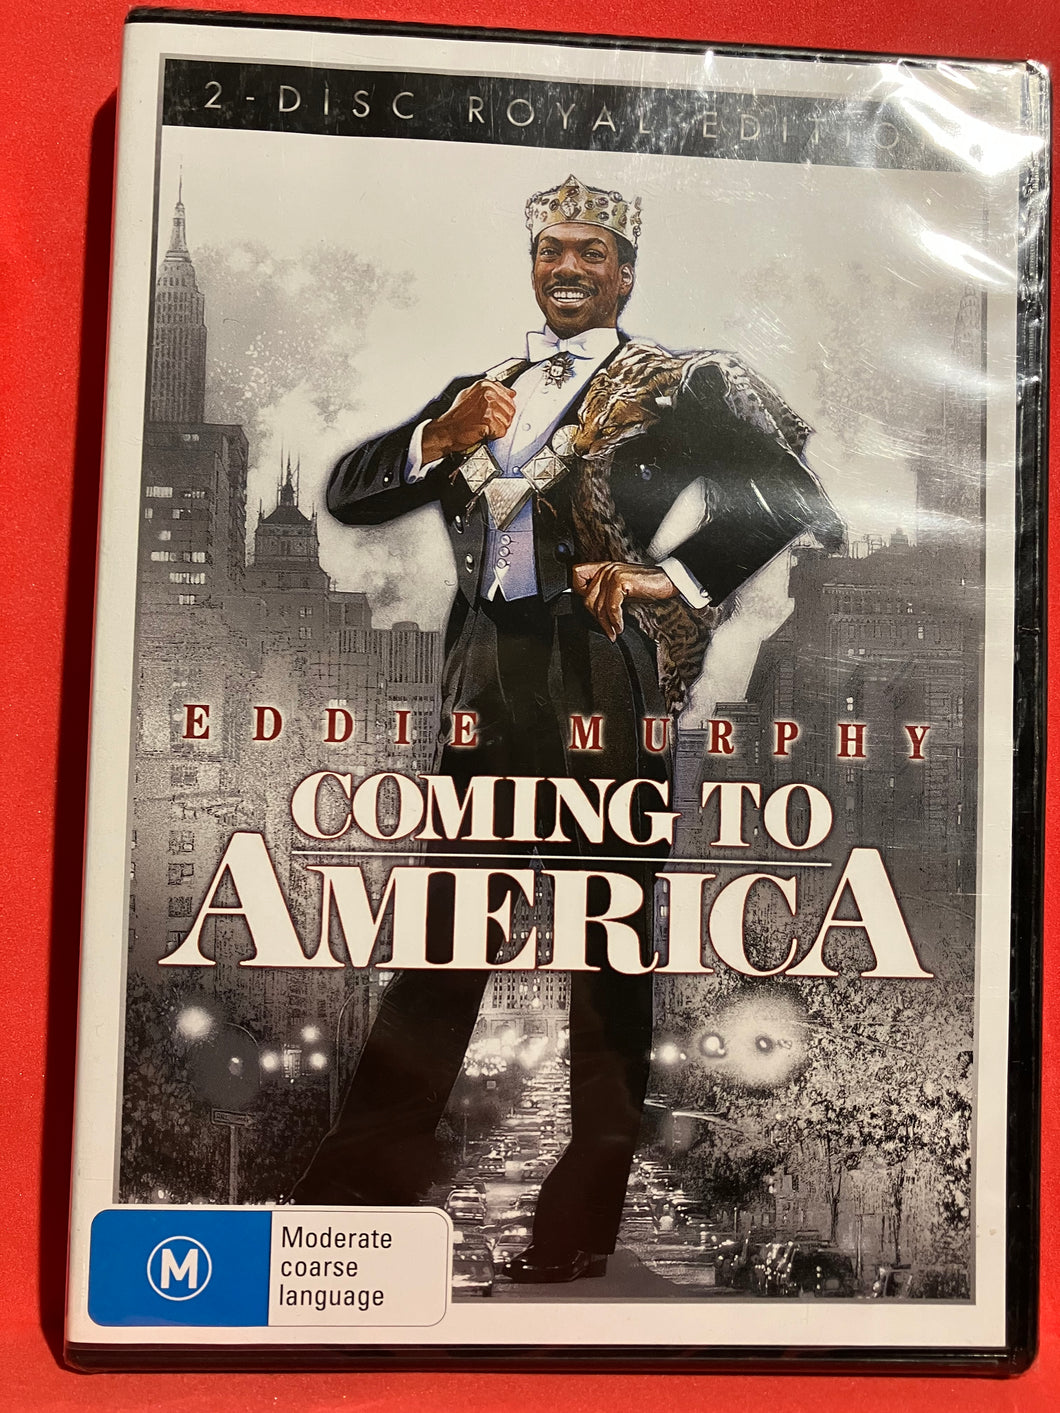 COMING TO AMERICA - 2 DISC EDITION - DVD (SEALED)